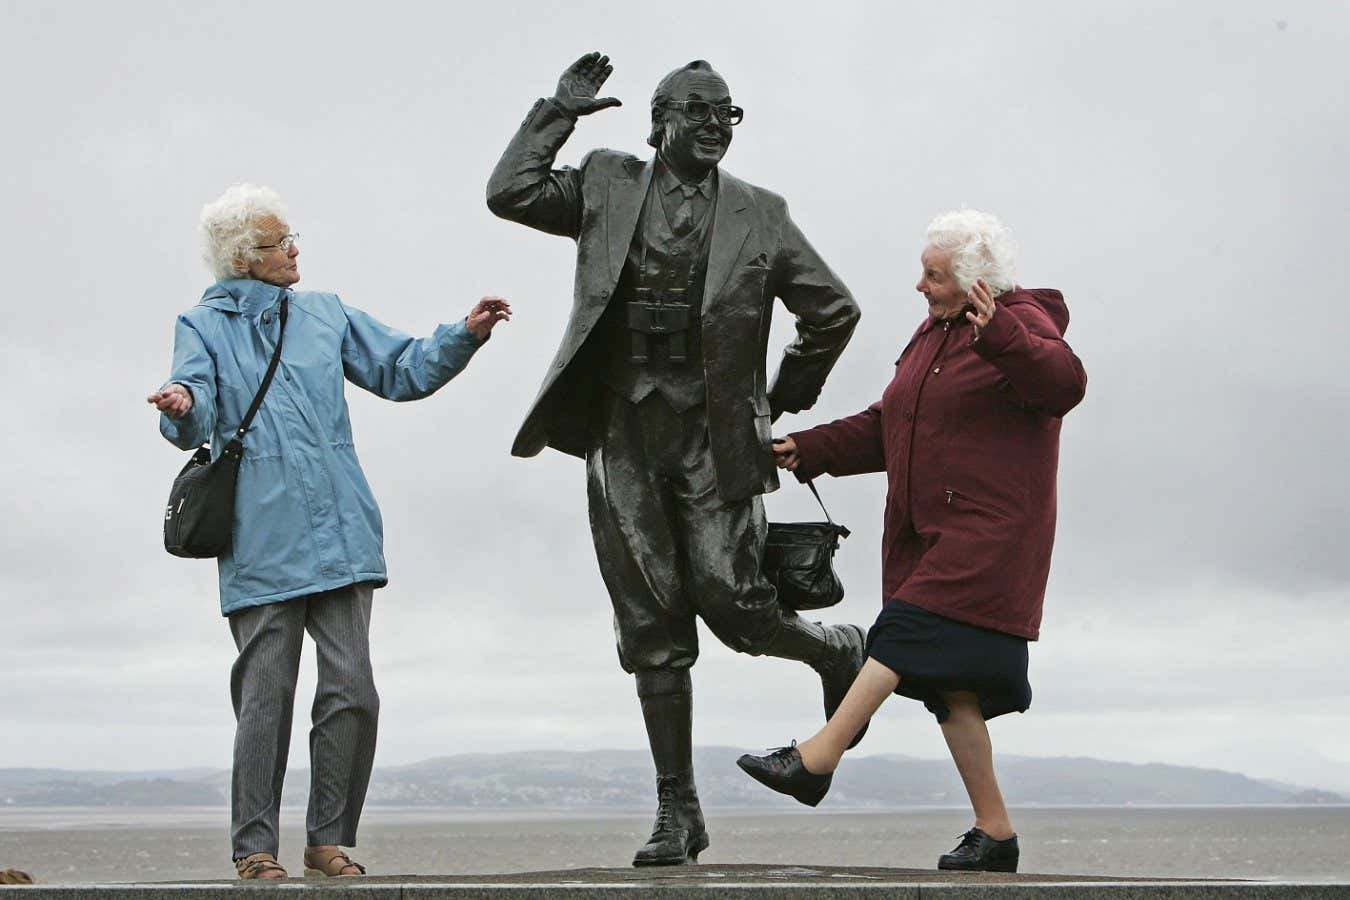 MORCAMBE, UNITED KINGDOM - JUNE 22: Despite inclement weather pensioners raise a happy smile as they perform the famously British dance of comedians Morcambe and Wise next to a statue of Eric Morcambe, at Morcambe Bayon June 22, 2006, in Morcambe, England. Confidence & Happiness specialist, Scientist Cliff Arnall from the University of Cardiff has identified June 23, 2006 as being the happiest day of the year. His calculations were based on outdoor activity, nature, social interaction, childhood summers, positive memories, temperature and holidays. (Photo by Christopher Furlong/Getty Images)